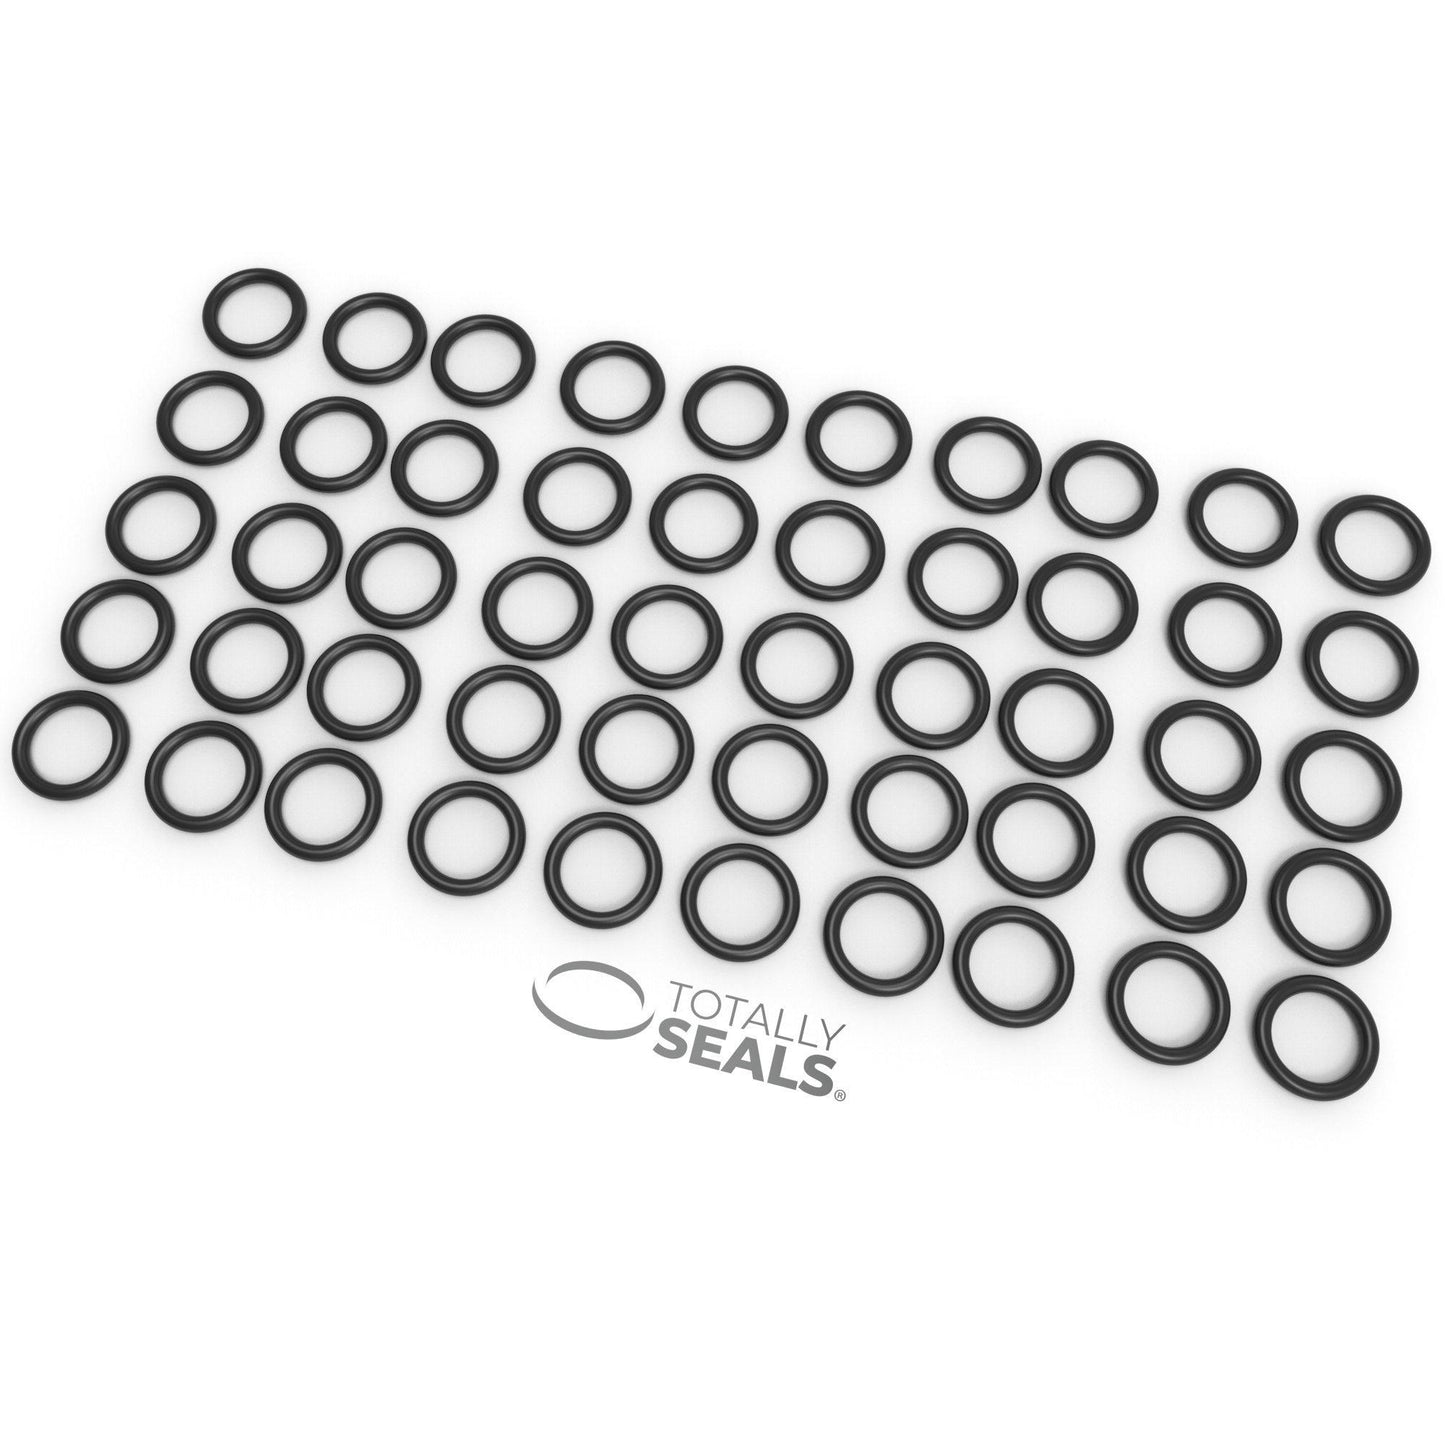 22mm x 1.5mm (25mm OD) Nitrile O-Rings - Totally Seals®